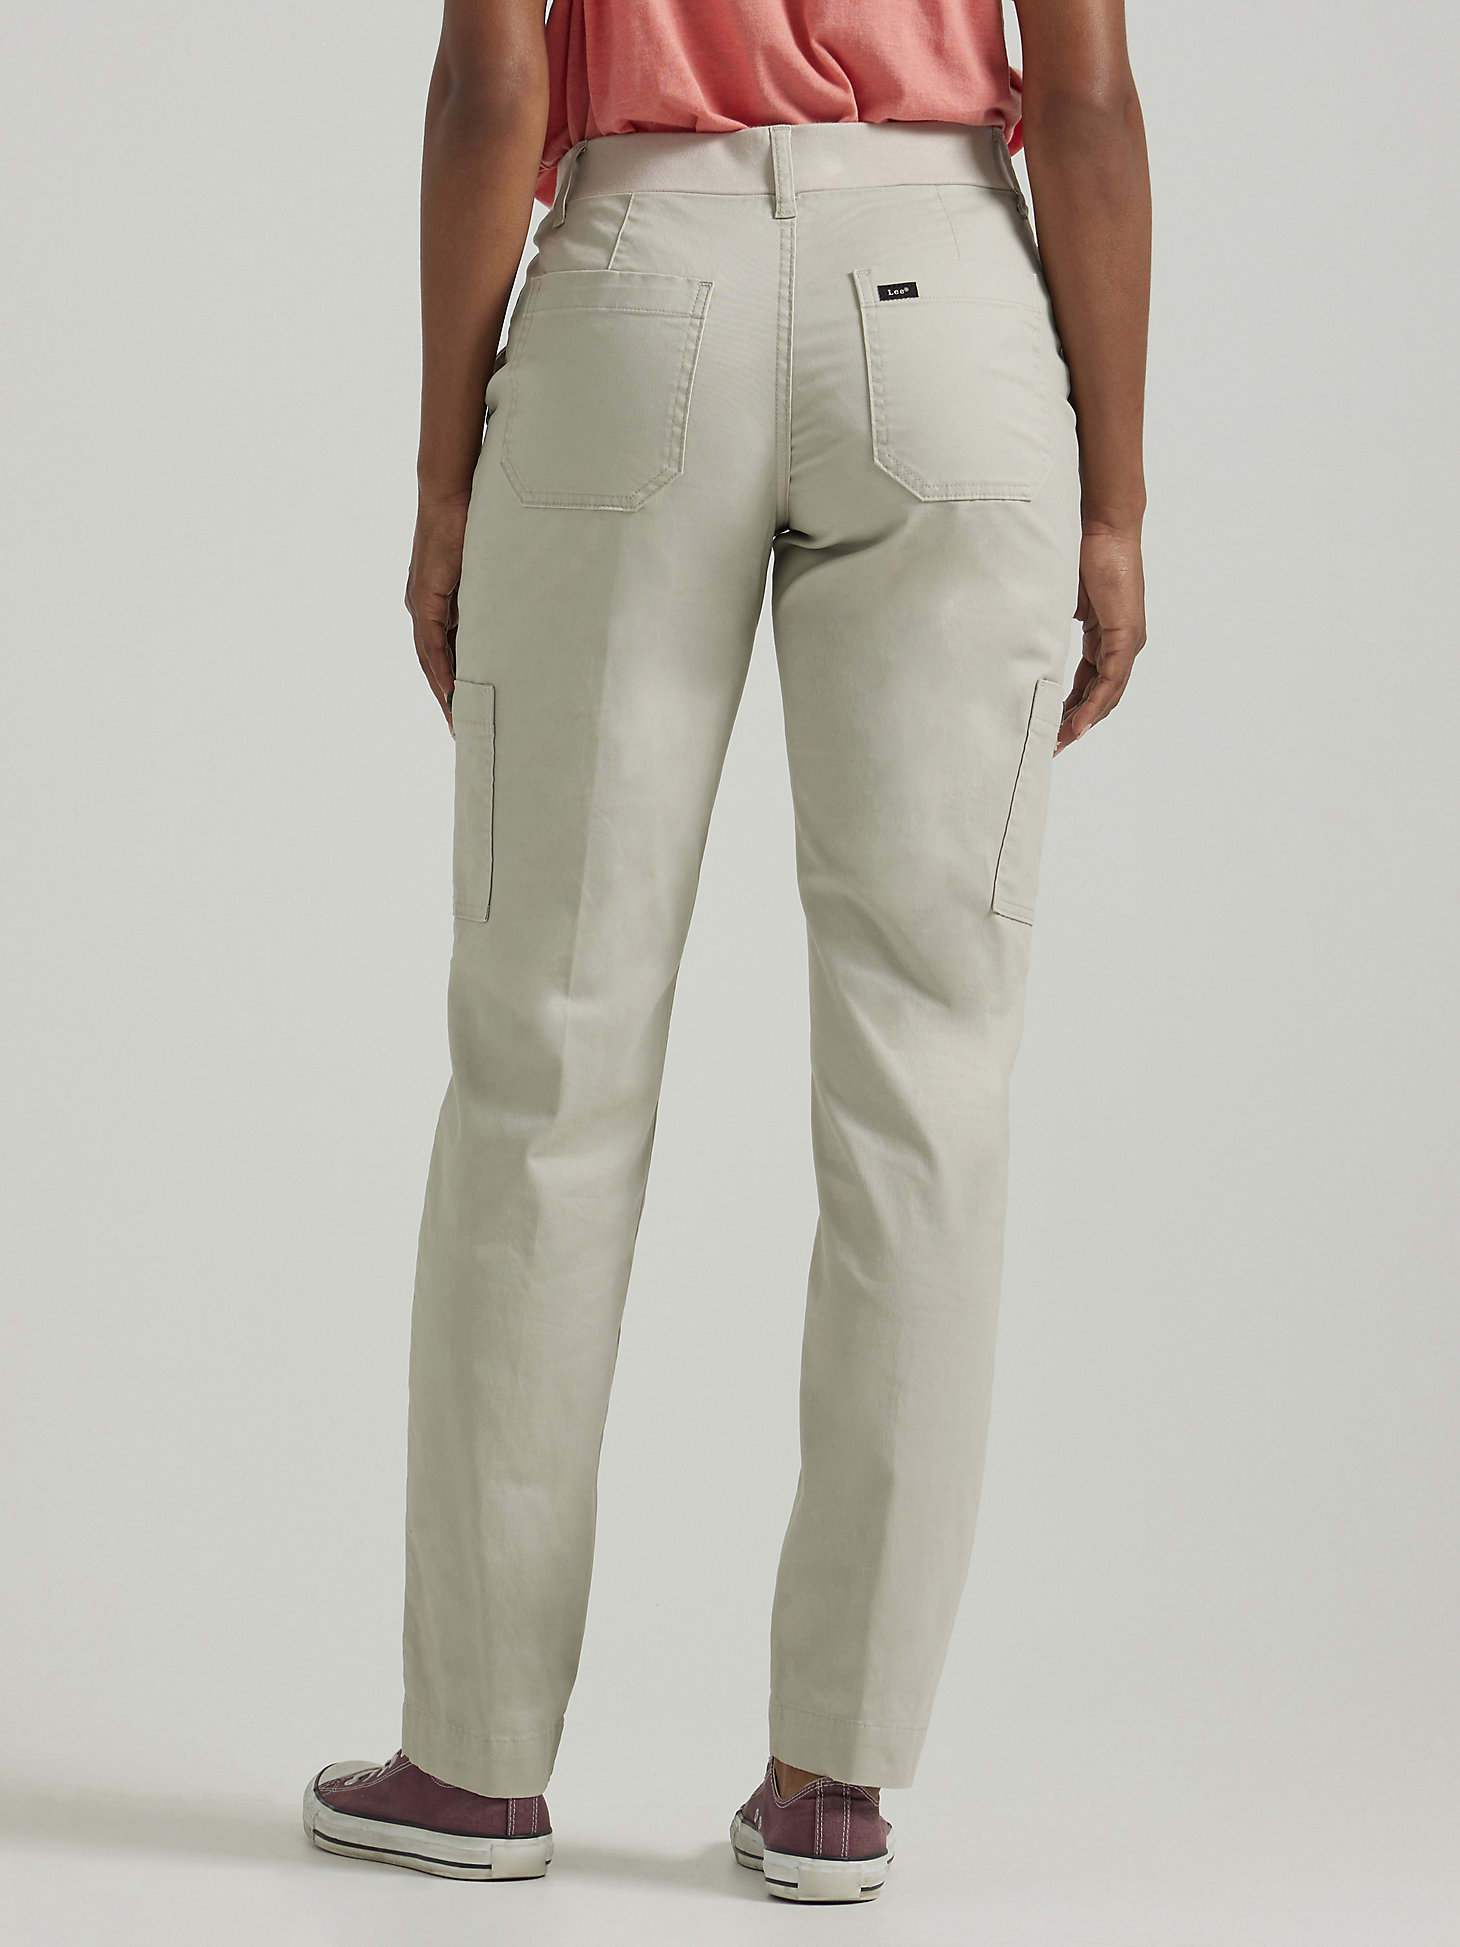 Women's Ultra Lux Comfort with Flex-to-Go Loose Utility Pant in Salina Stone alternative view 2